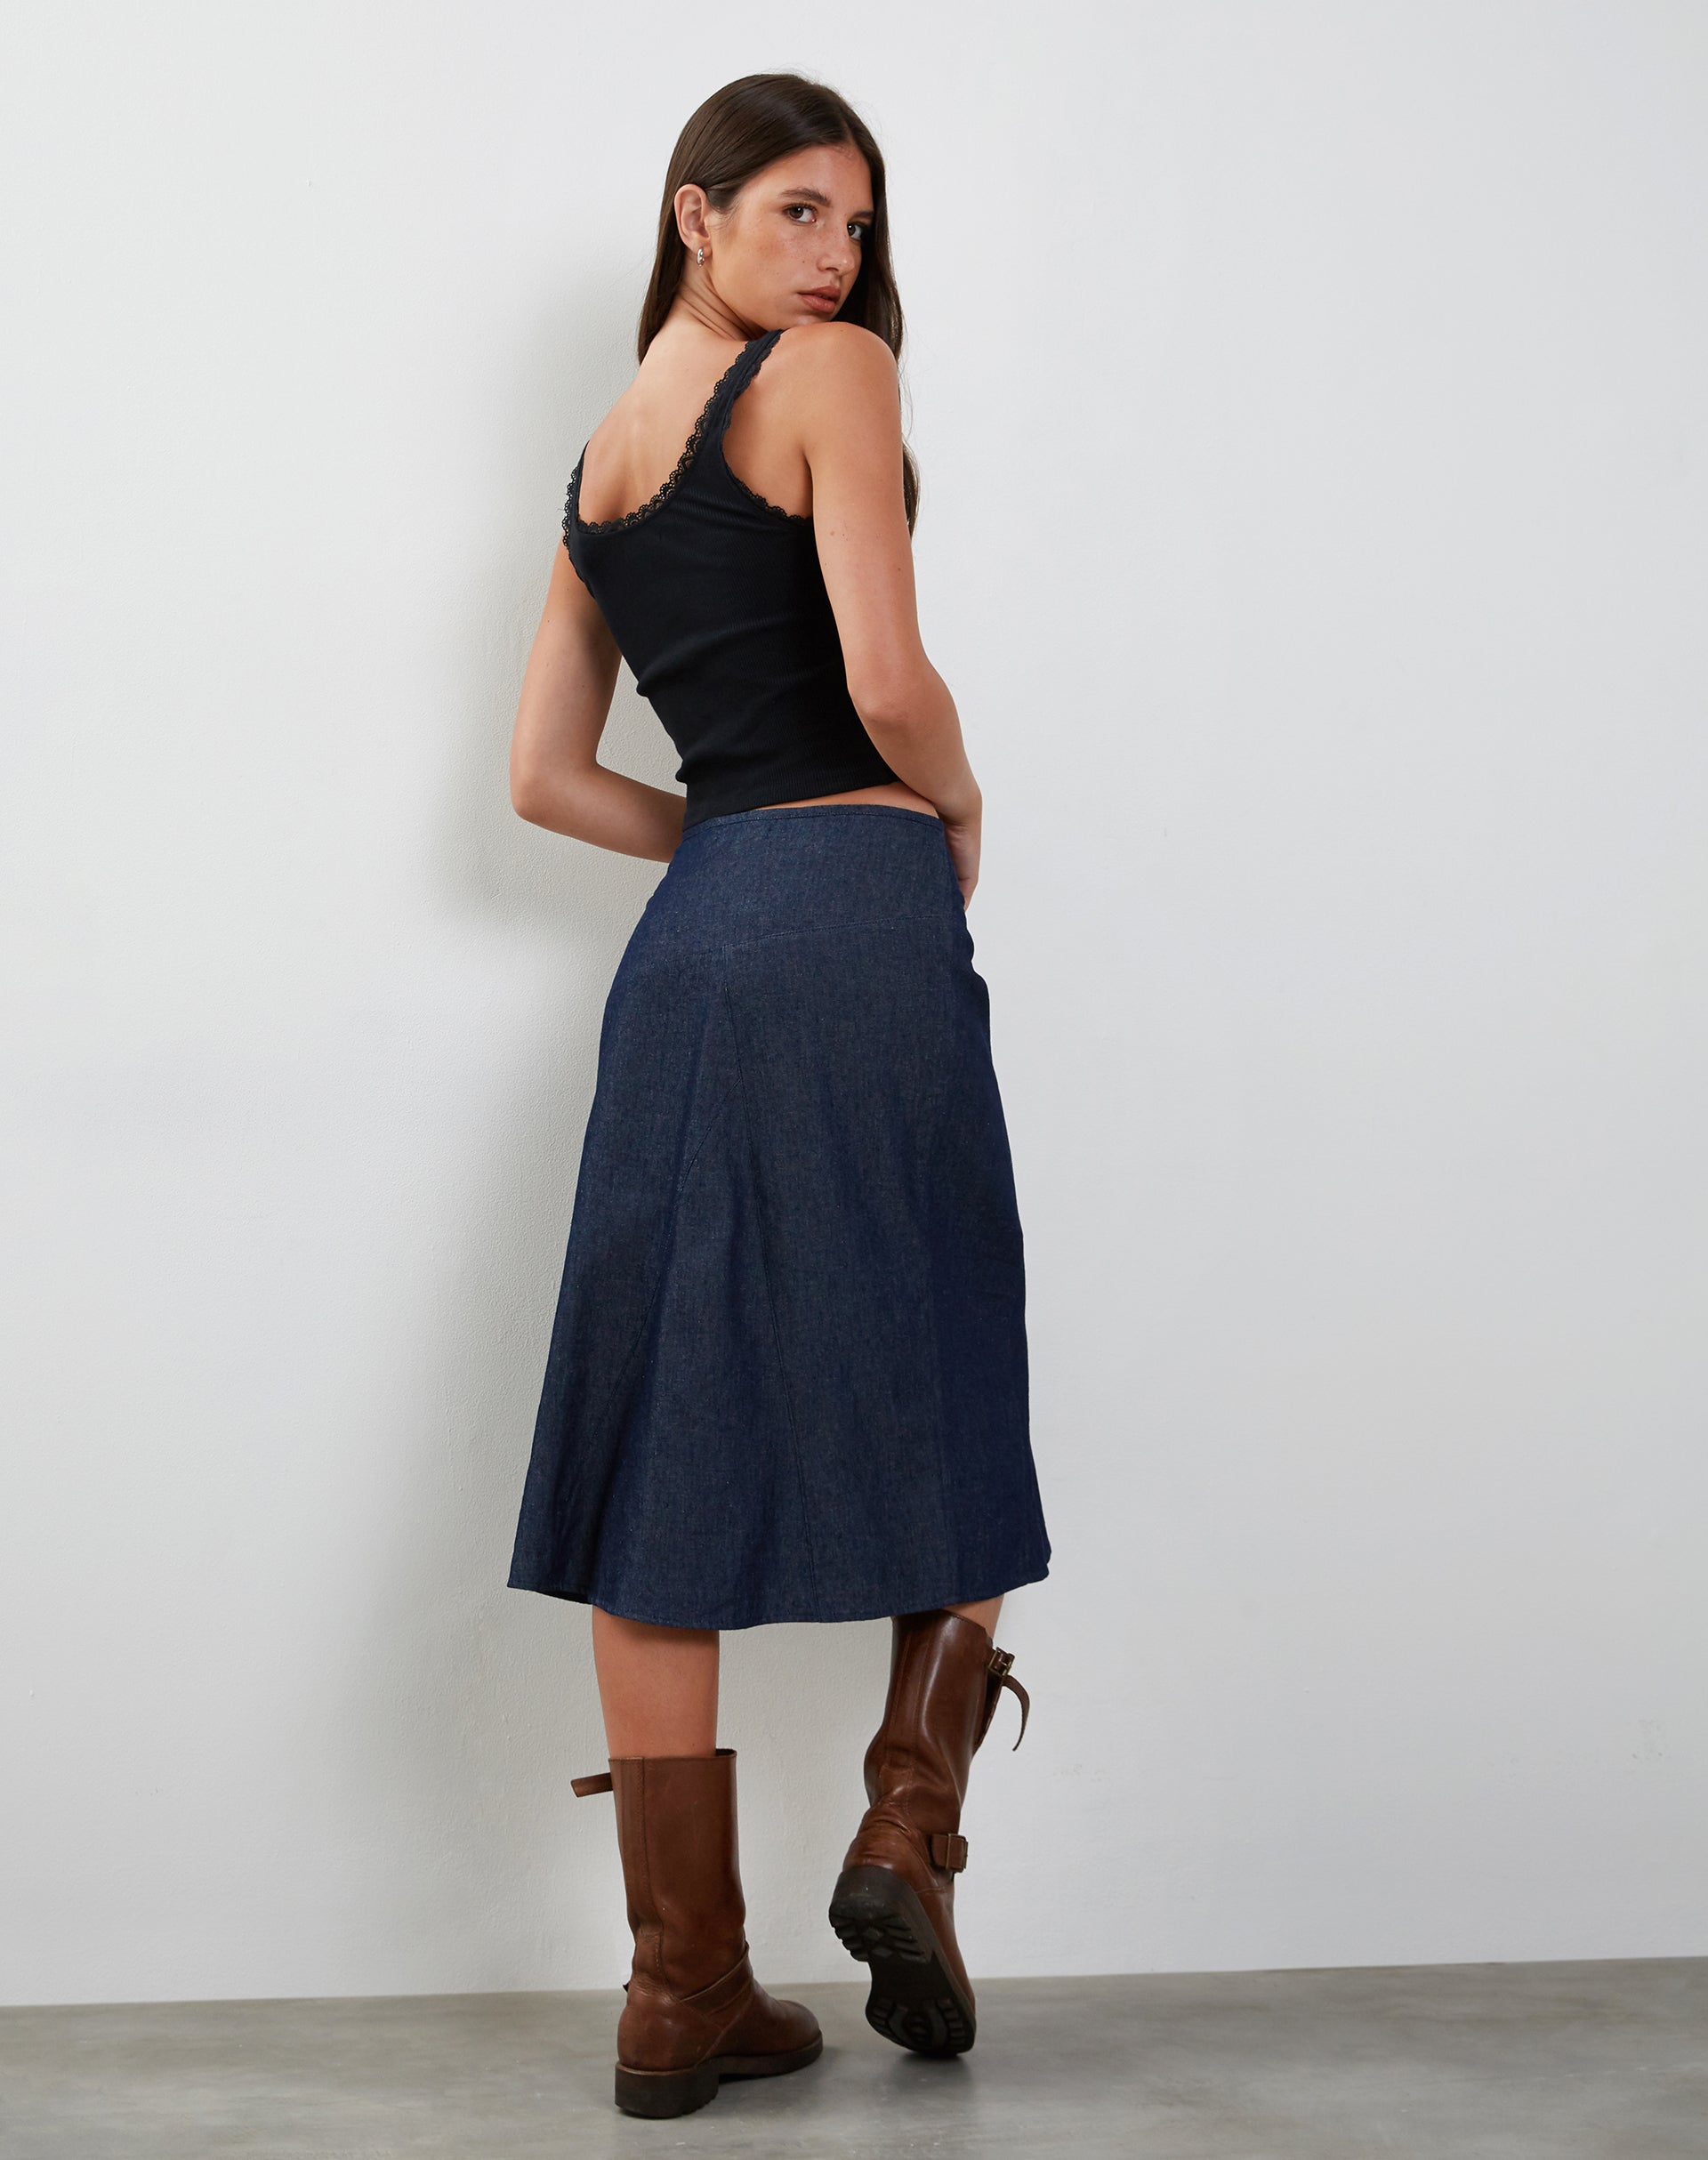 The Best Thing I Tried This Week Is This Butt-Flattering Denim Midi Skirt